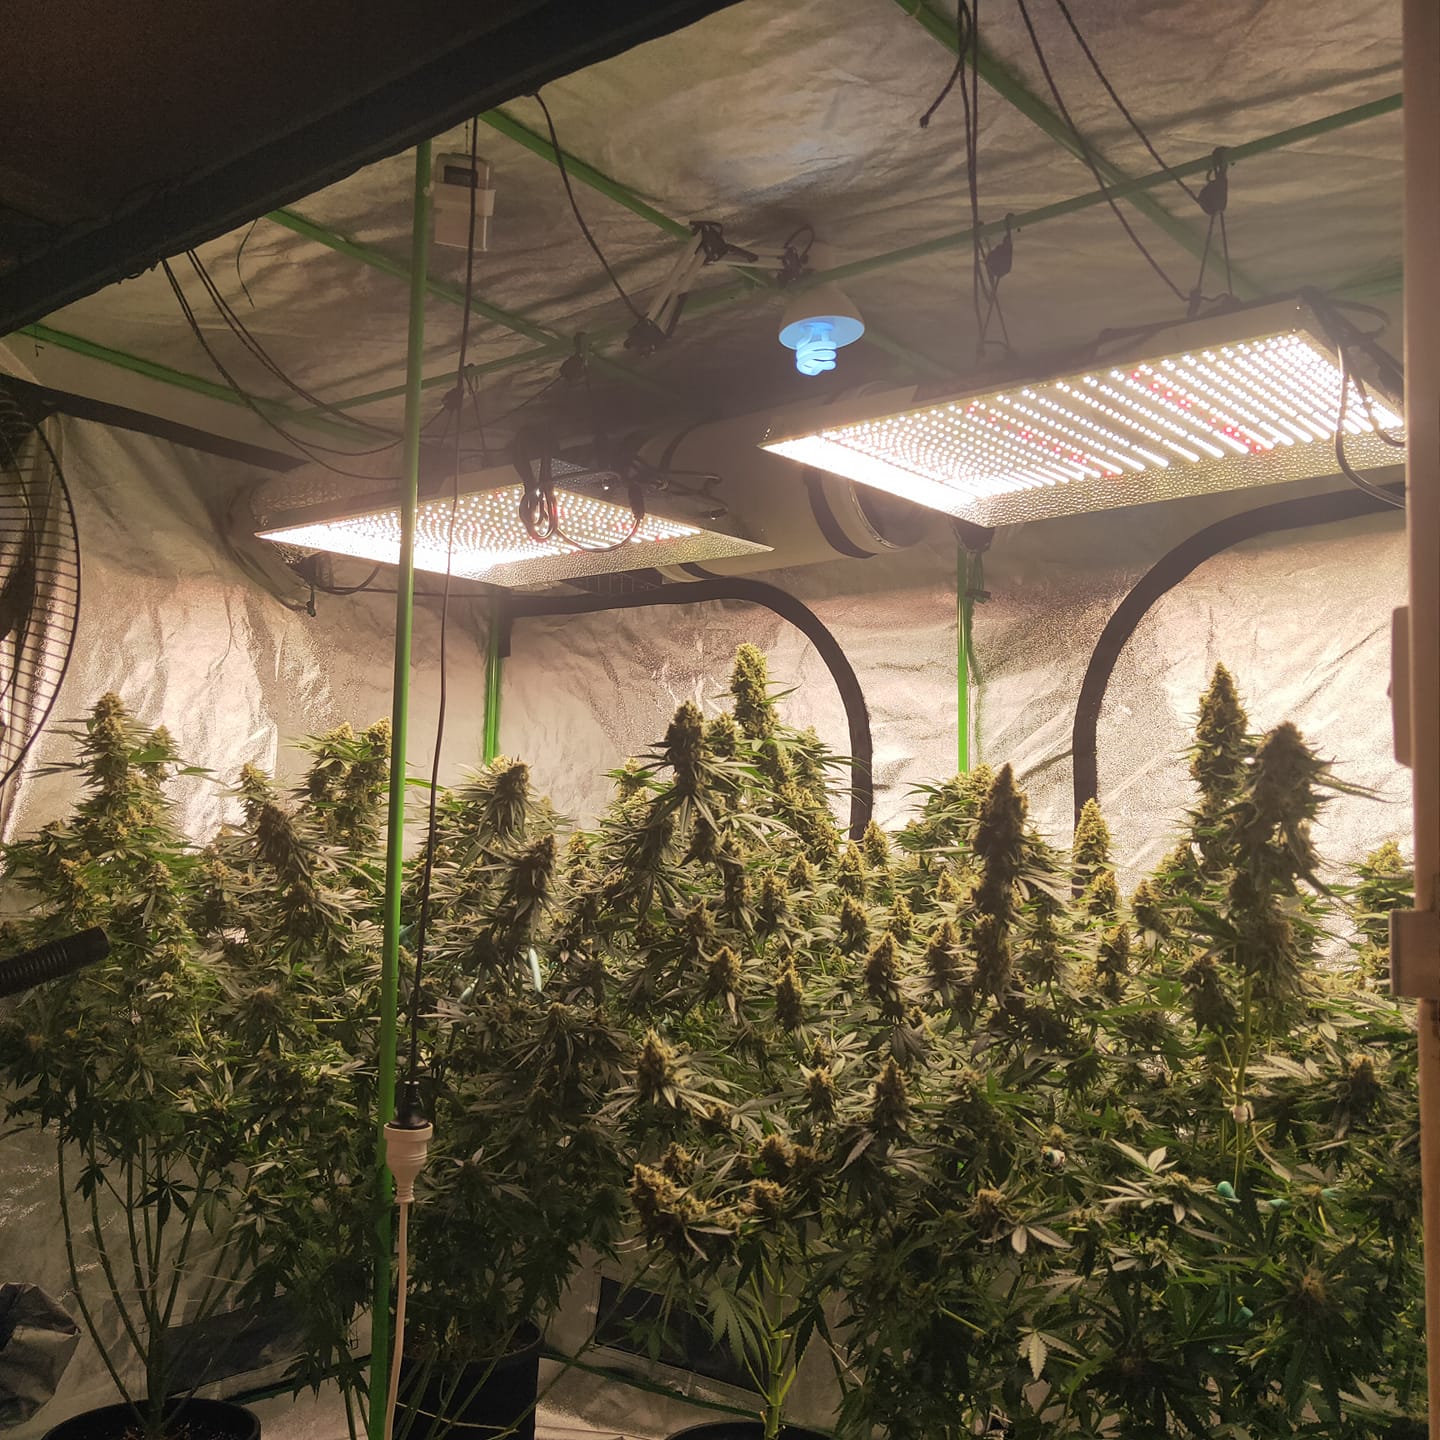 2xTS3000-FB@David Hicks-10% Uva-b light in the middle-Yielded 2.5 pounds dry-7 plants stretch ...jpg